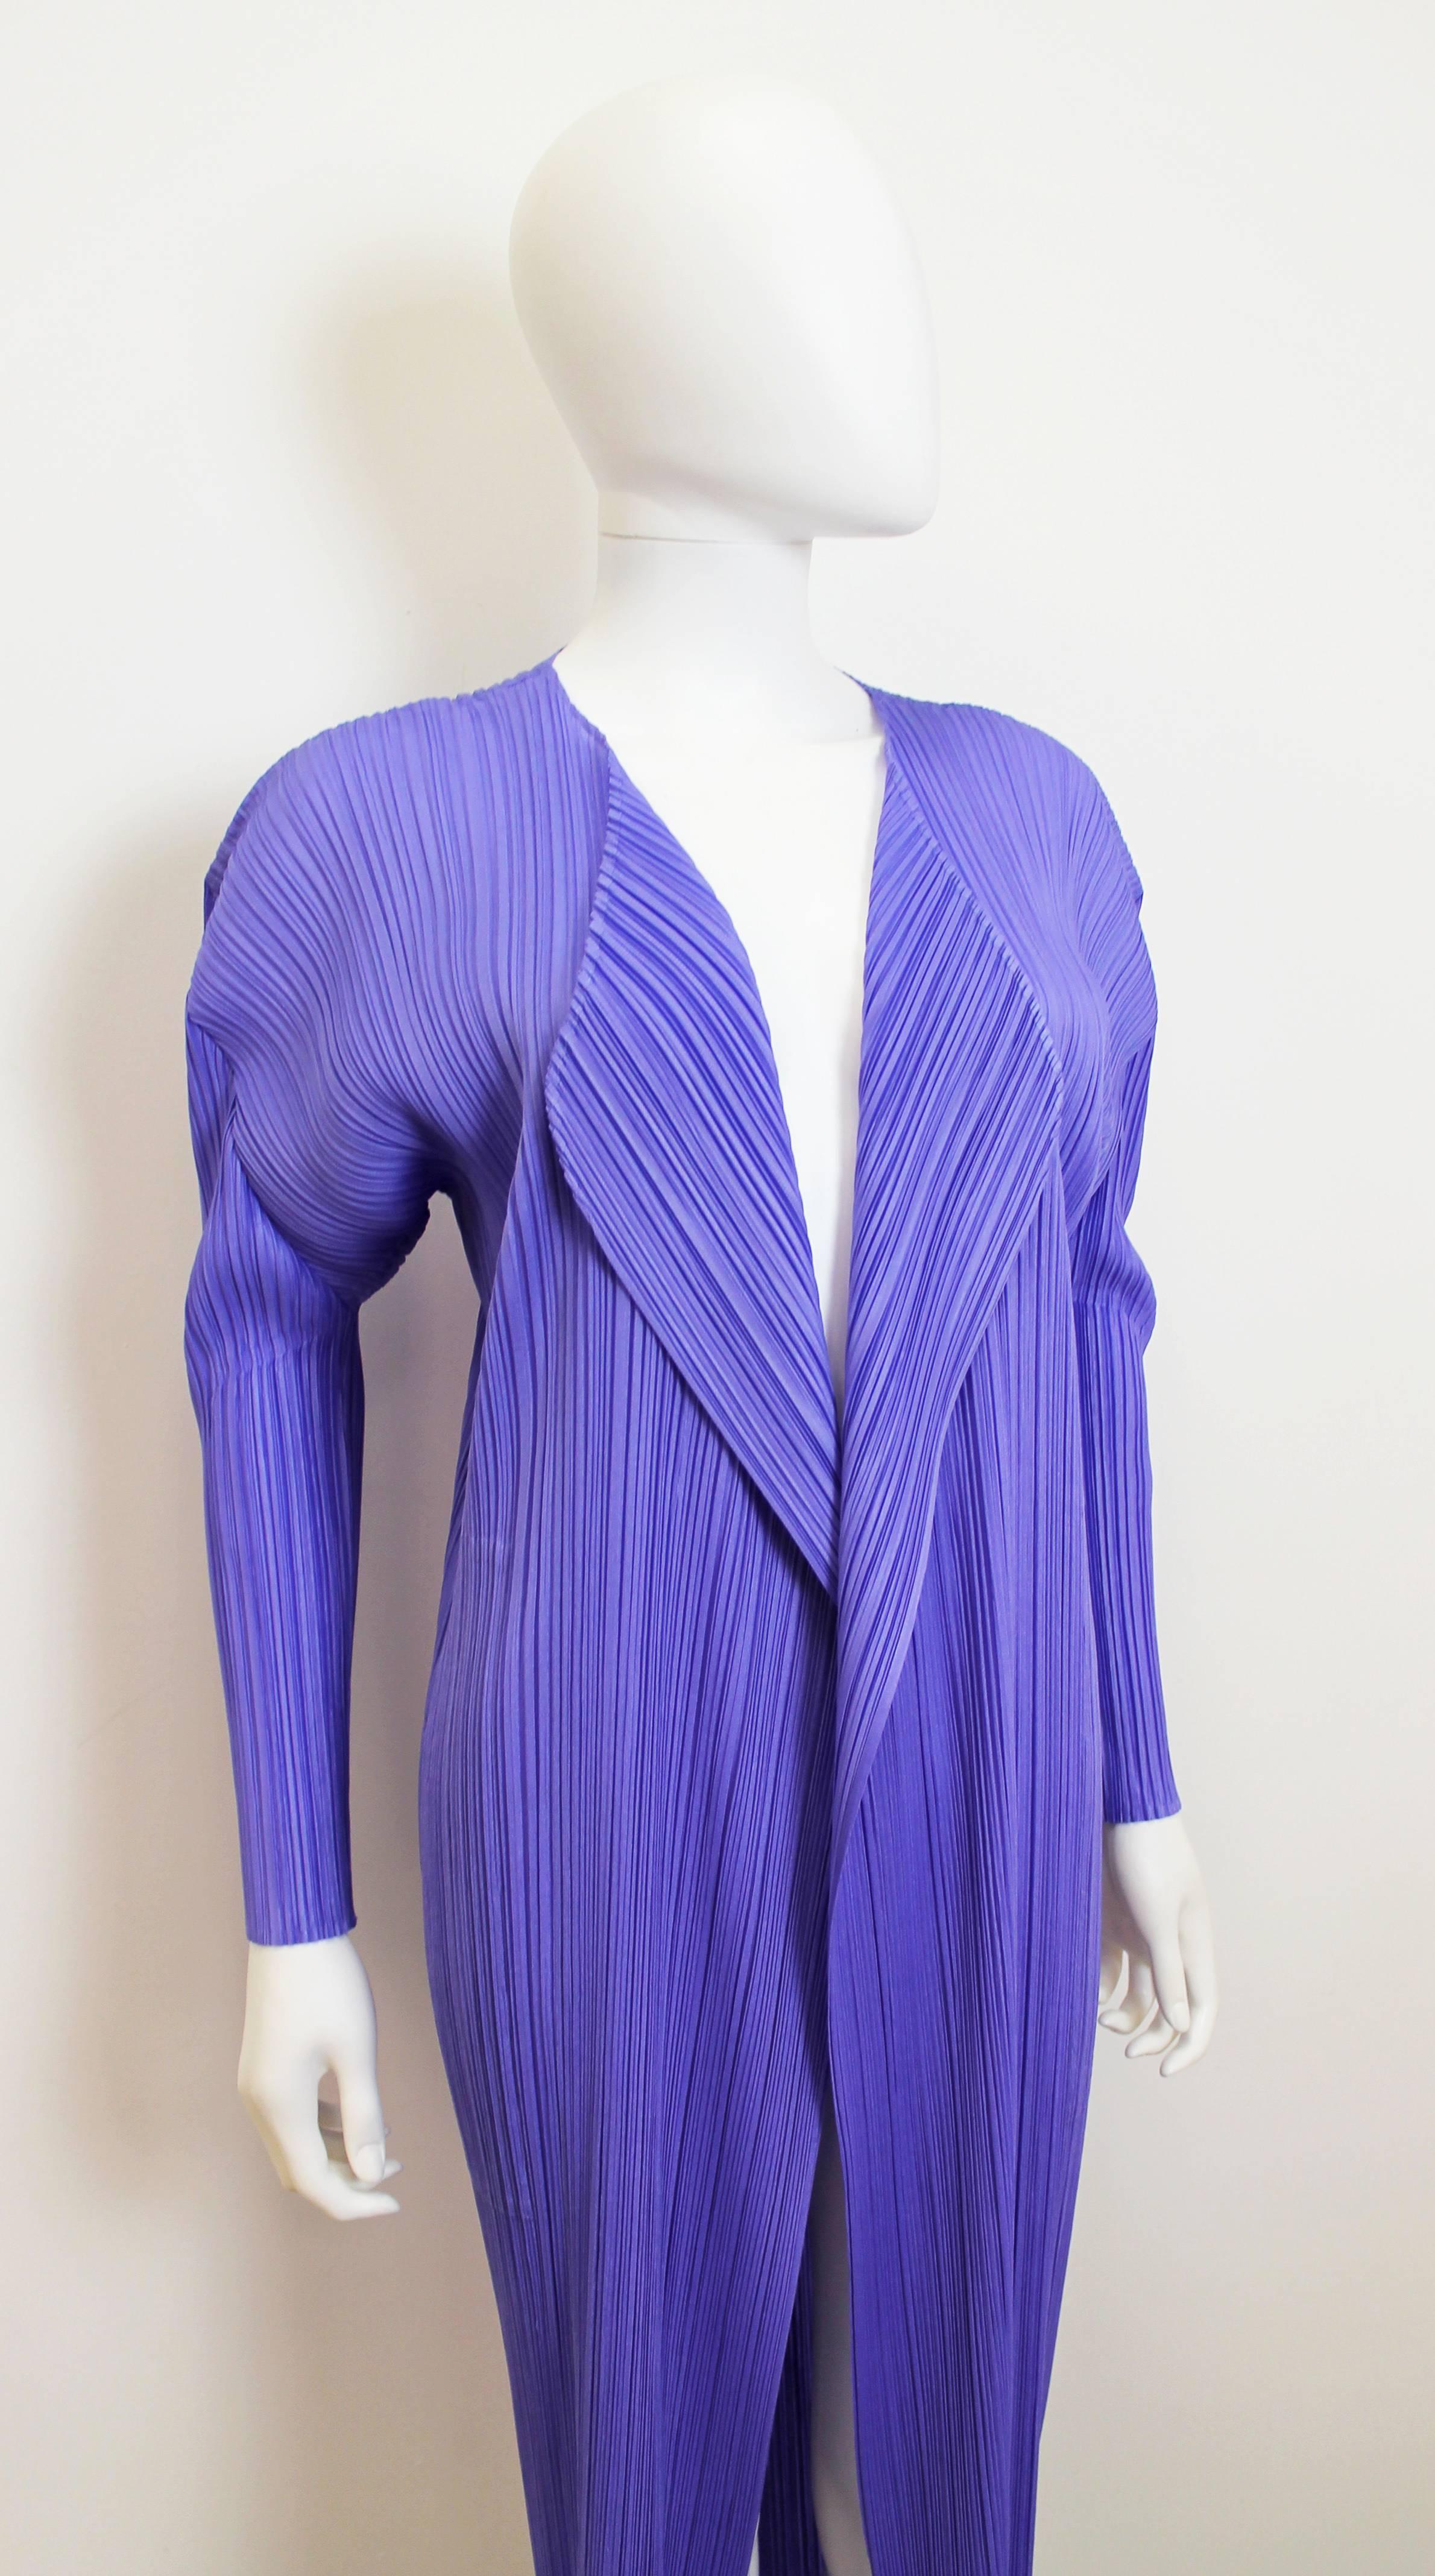 Classic Issey Miyake Pleats Please pleated coat in periwinkle. Believed to be from the late 90's. Features two pockets hidden in the side-seams, as well as a collar that can be flipped up or down. Can fit many sizes.